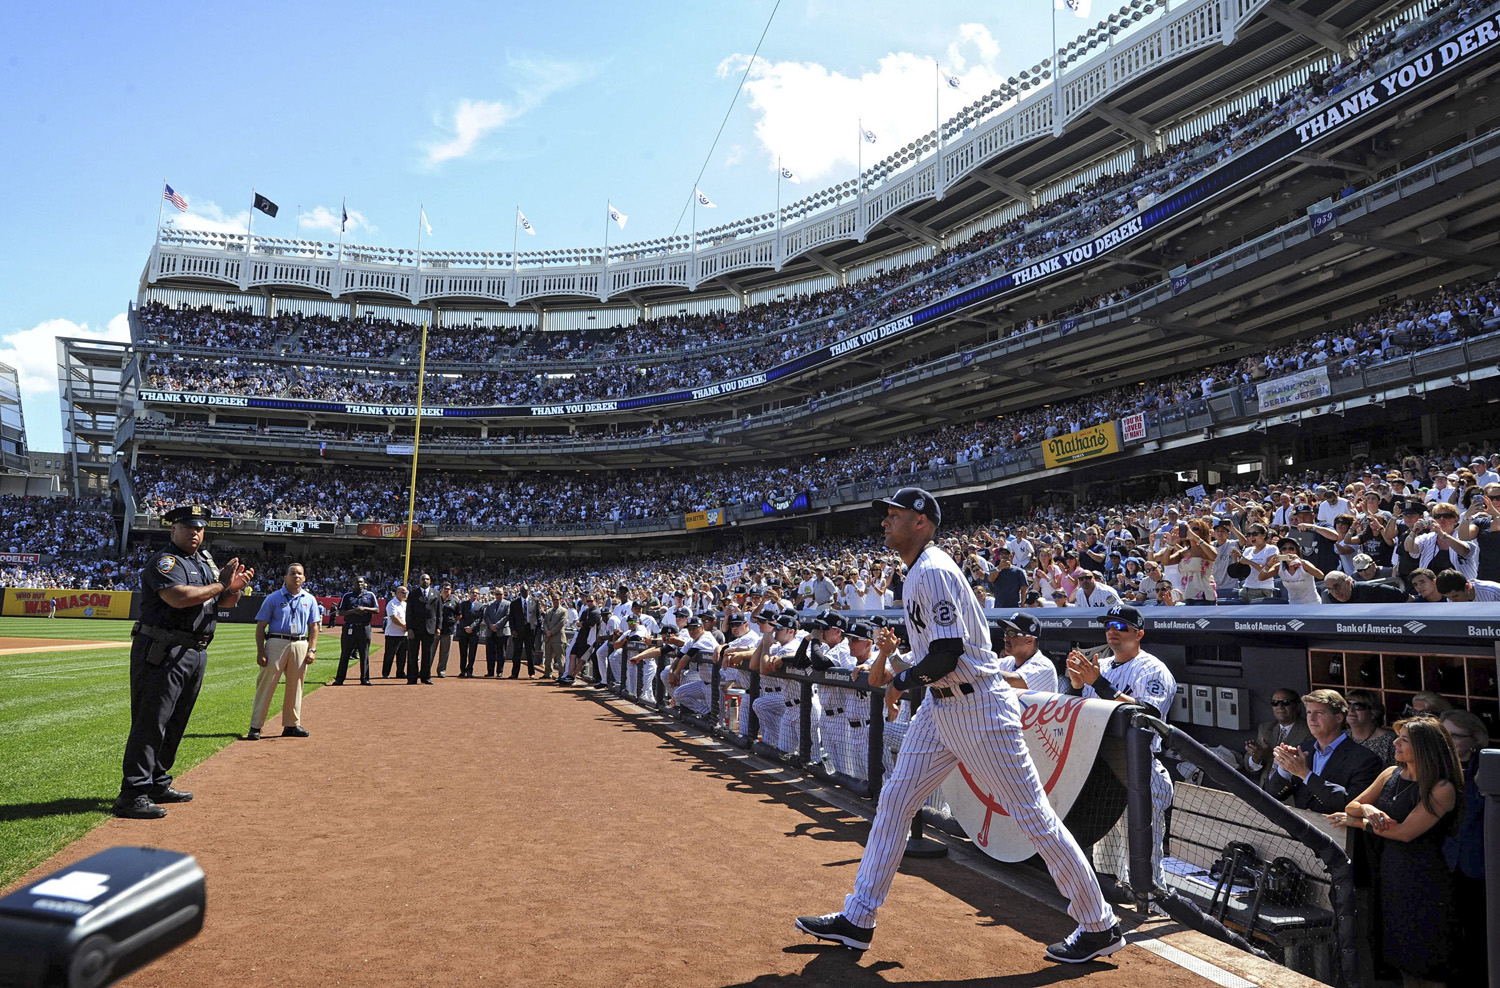 **EDS.: RETRANSMISSION TO CORRECT BYLINE TITLE TO STAFF** Yankees shortstop Derek Jeter strides onto the field as he is introduced for Derek Jeter Day events, before the team's game against the Kansas City Royals at Yankee Stadium in New York, Sept. 7, 2014. Jeter has announced that he will retire after this season. (Barton Silverman/The New York Times)